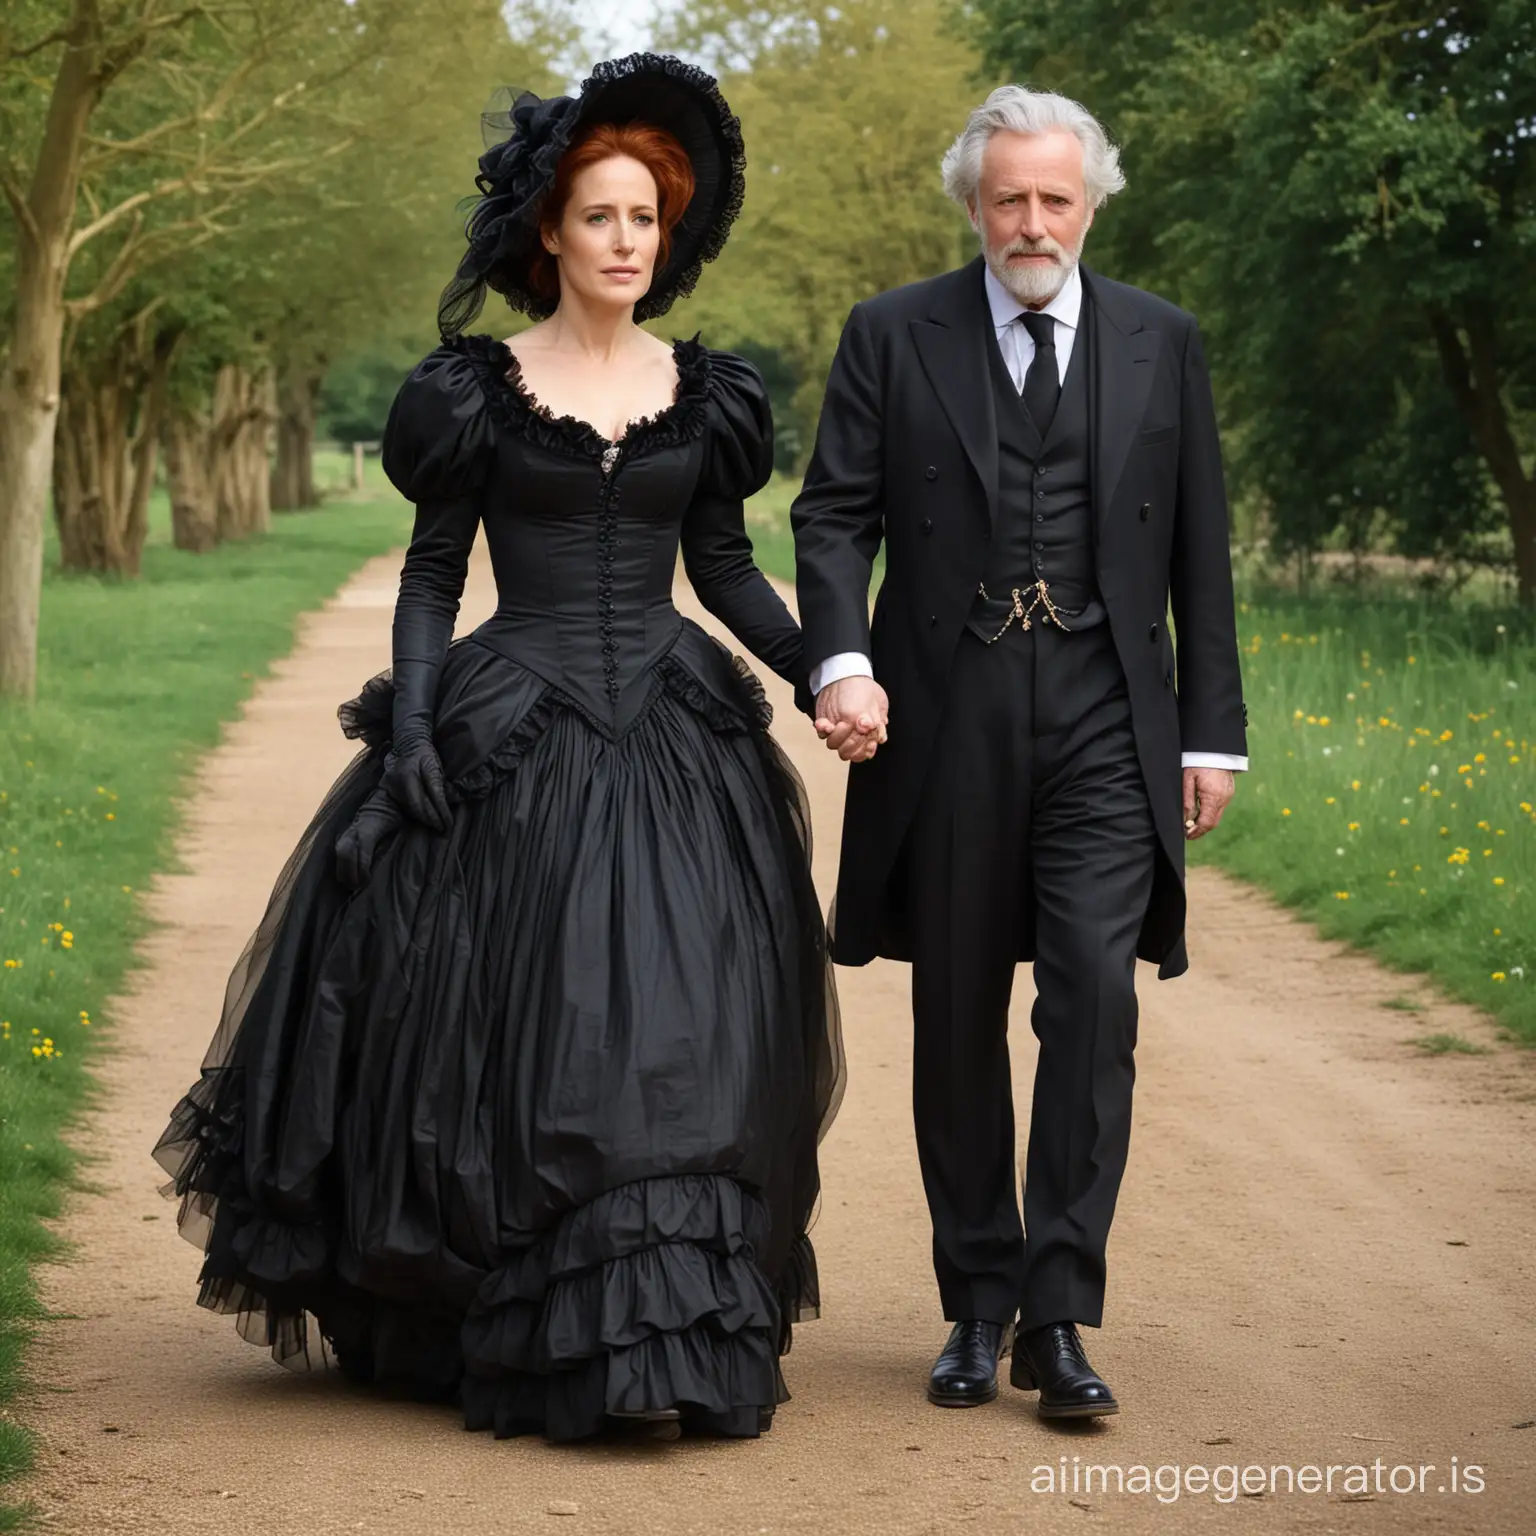 Victorian-Newlyweds-Redhaired-Gillian-Anderson-in-Elegant-Attire-with-Her-Gentleman